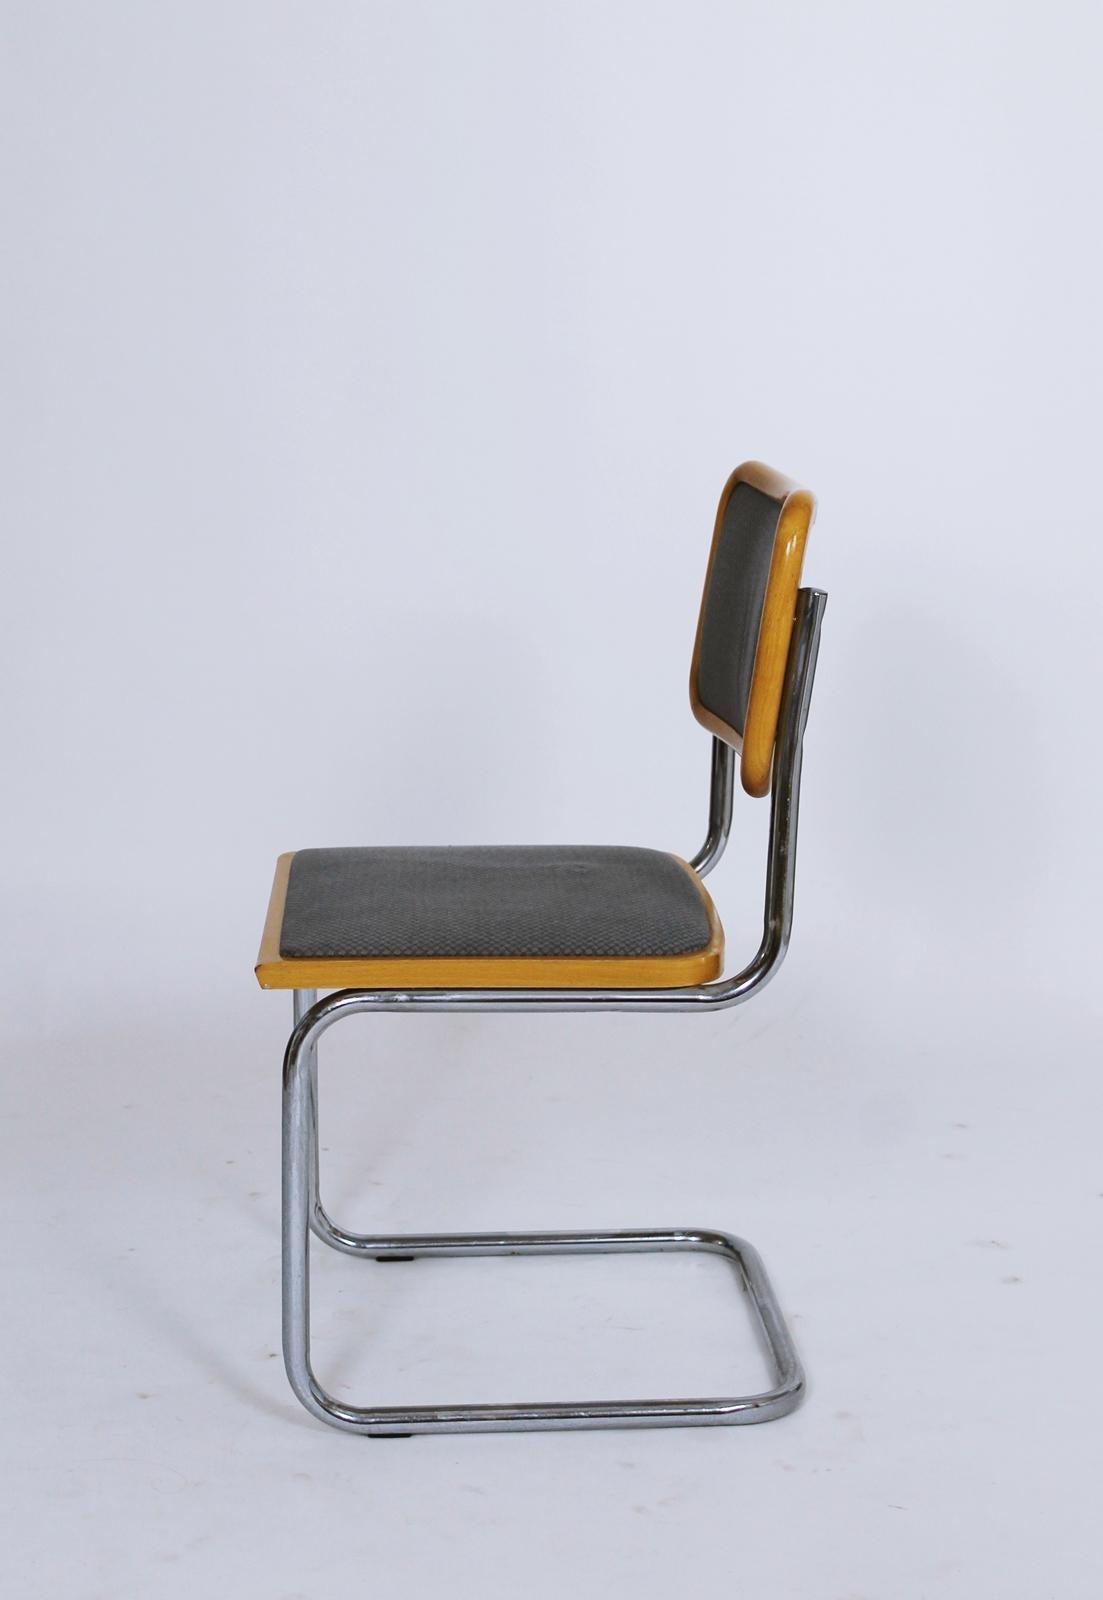 marcel breuer chair made in italy